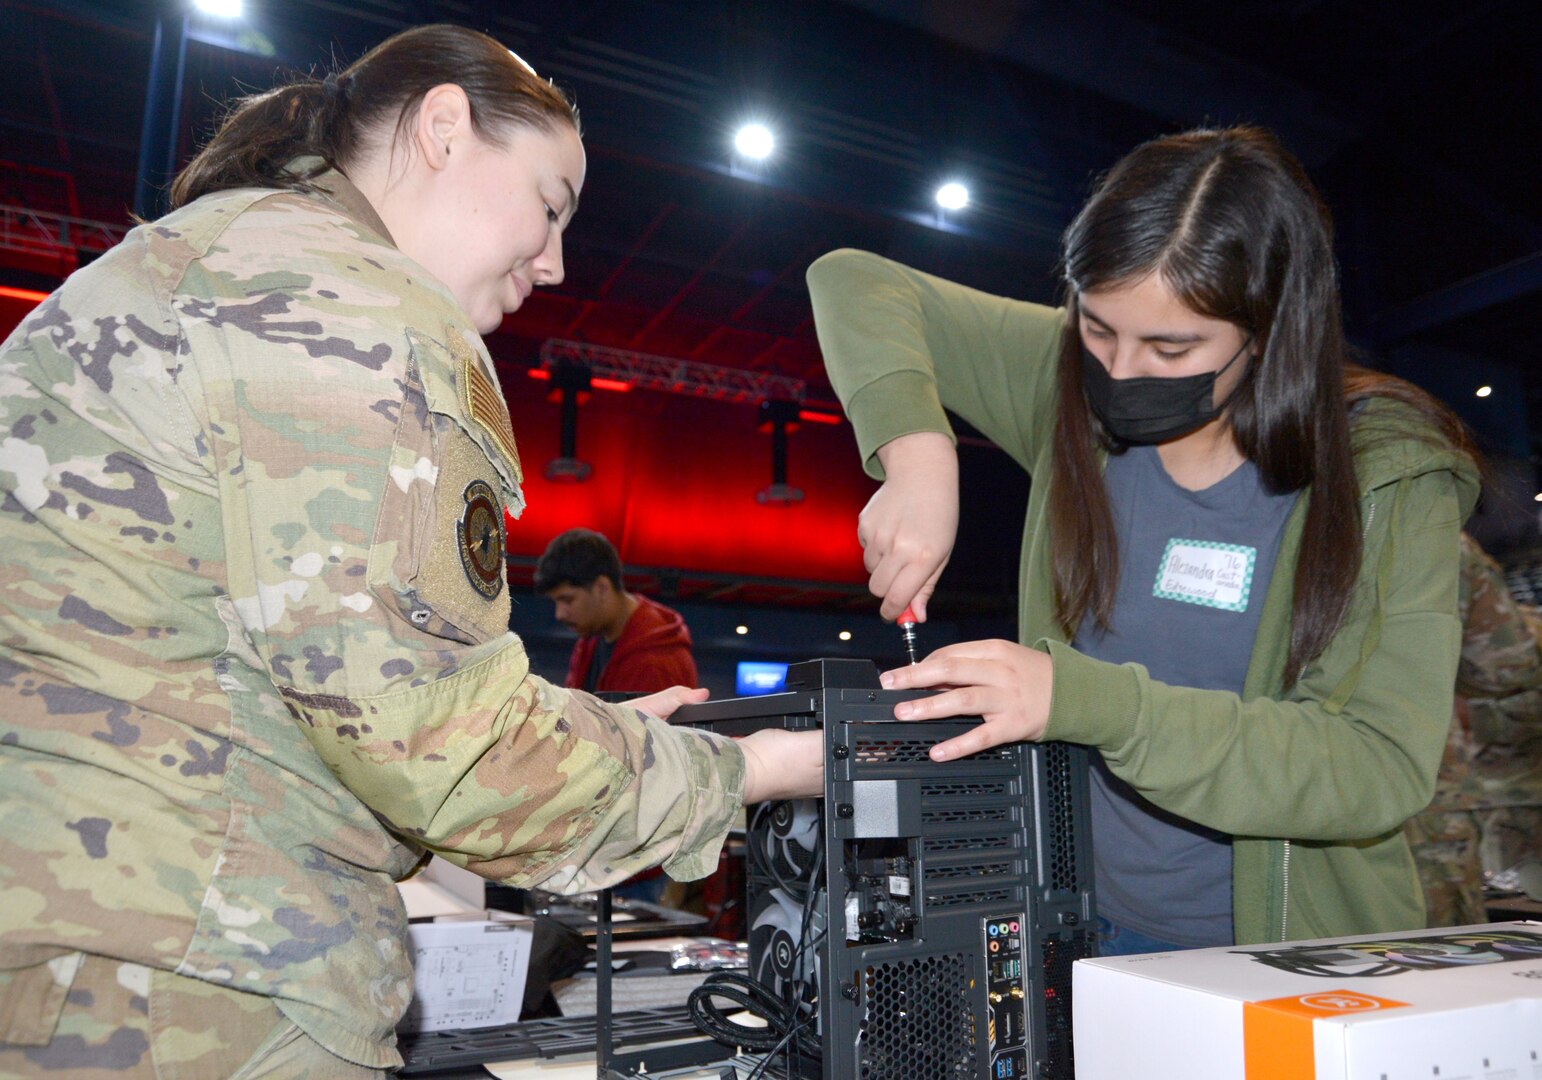 Master Sgt. Danielle Loomis, 688th Cyber Wing Network Operations Cell section chief assists Alezandra Castaneda, from John F. Kennedy High School, with attaching a component during the ‘Build Your Future’ event, April 29, 2023, at Tech Port Arena, in San Antonio, Texas. Loomis and the other 19 mentors displayed military expertise and inspired students to pursue cyber in the military, with industry partners, or academia.